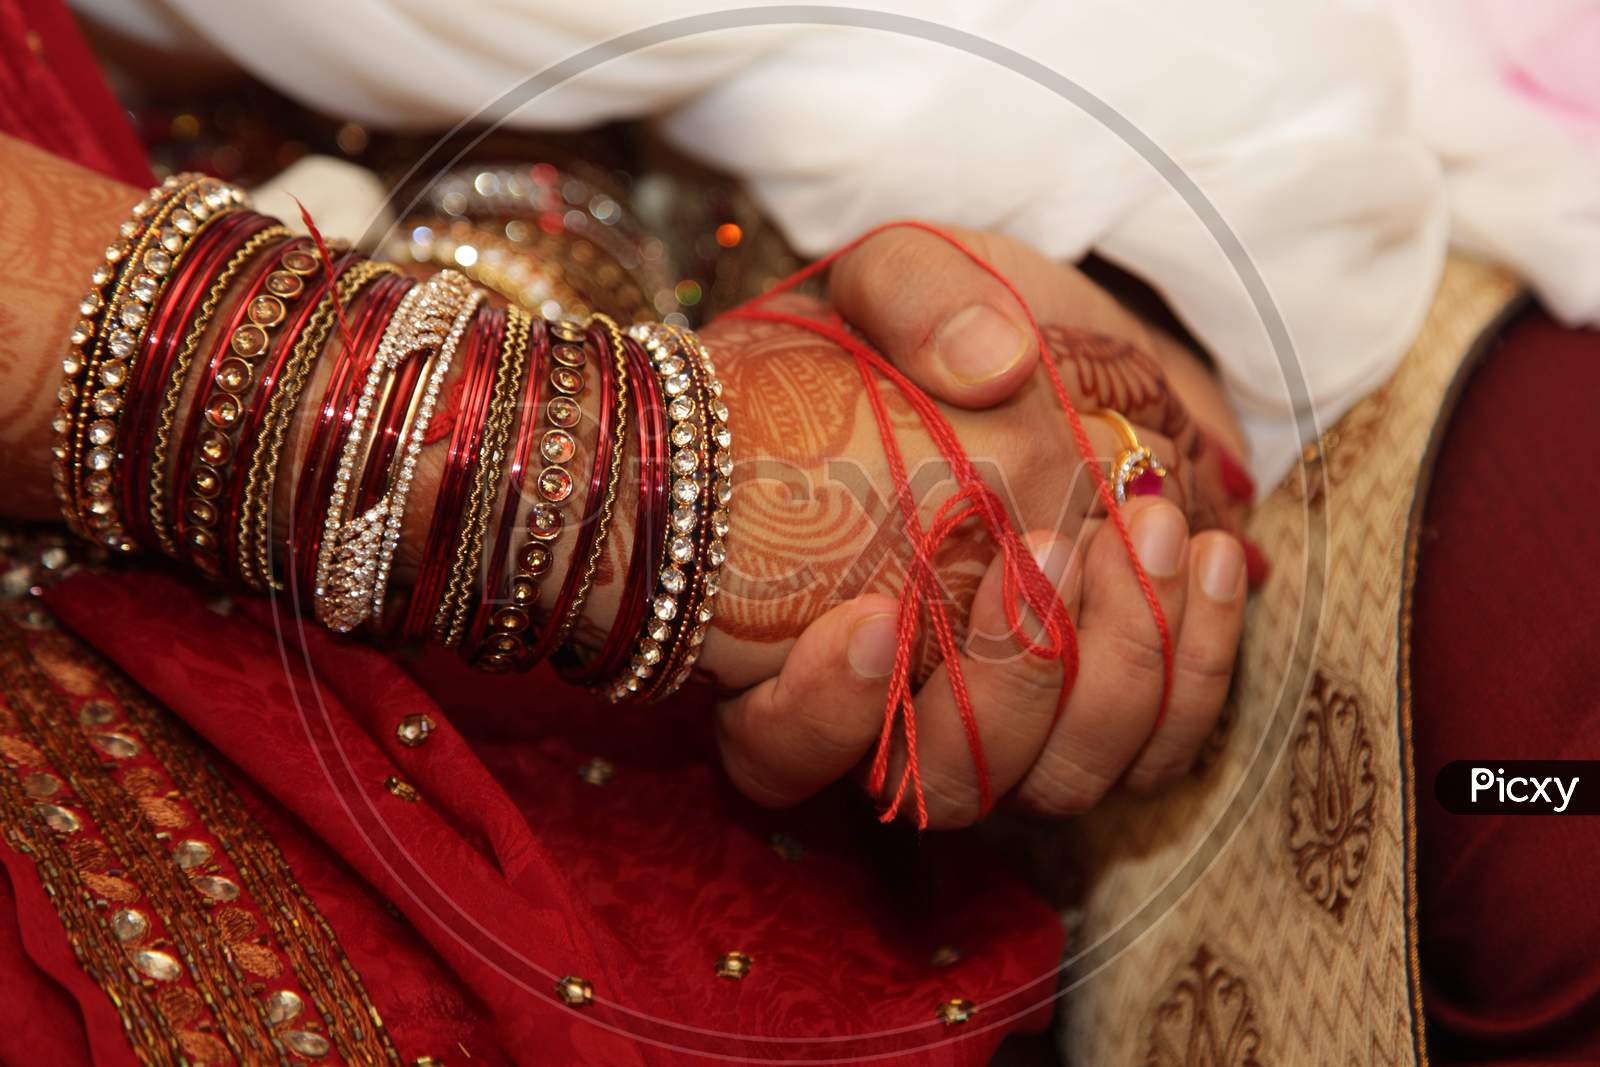 Indian Traditional Marriage Scenes With Bride And Bridegroom Holding Hands During Wedding Rituals